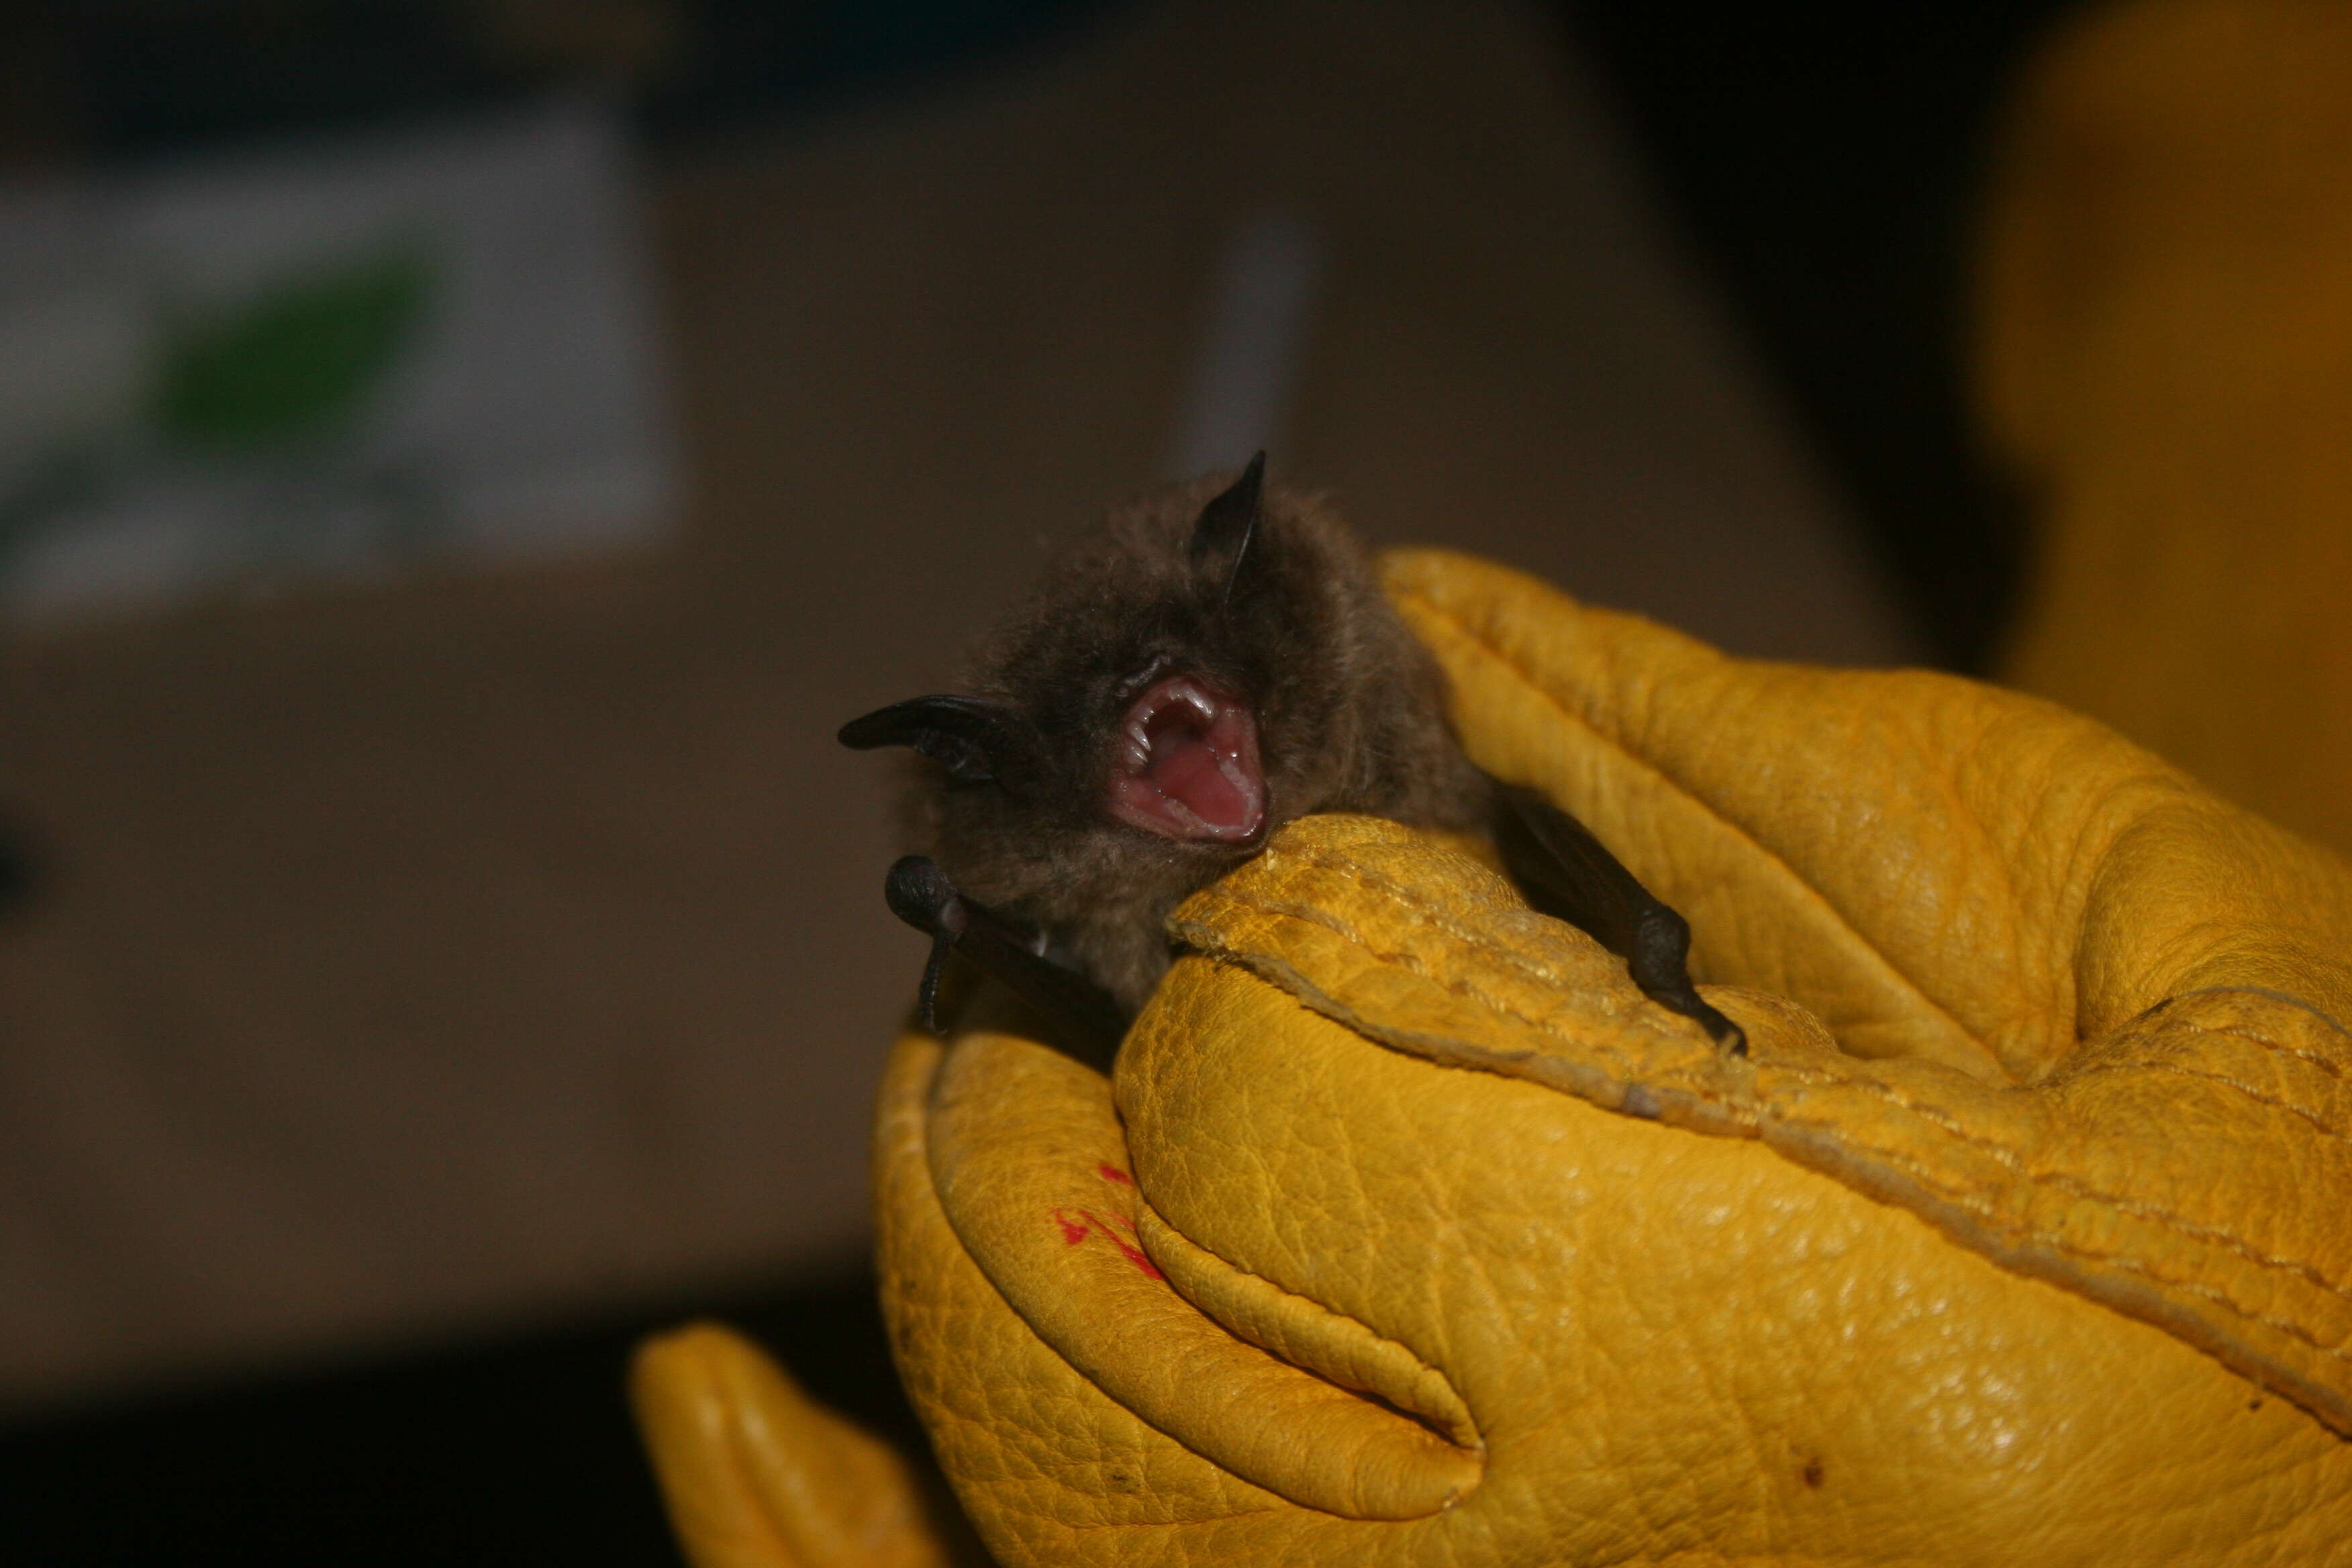 Image of Northern Long-Eared Bat